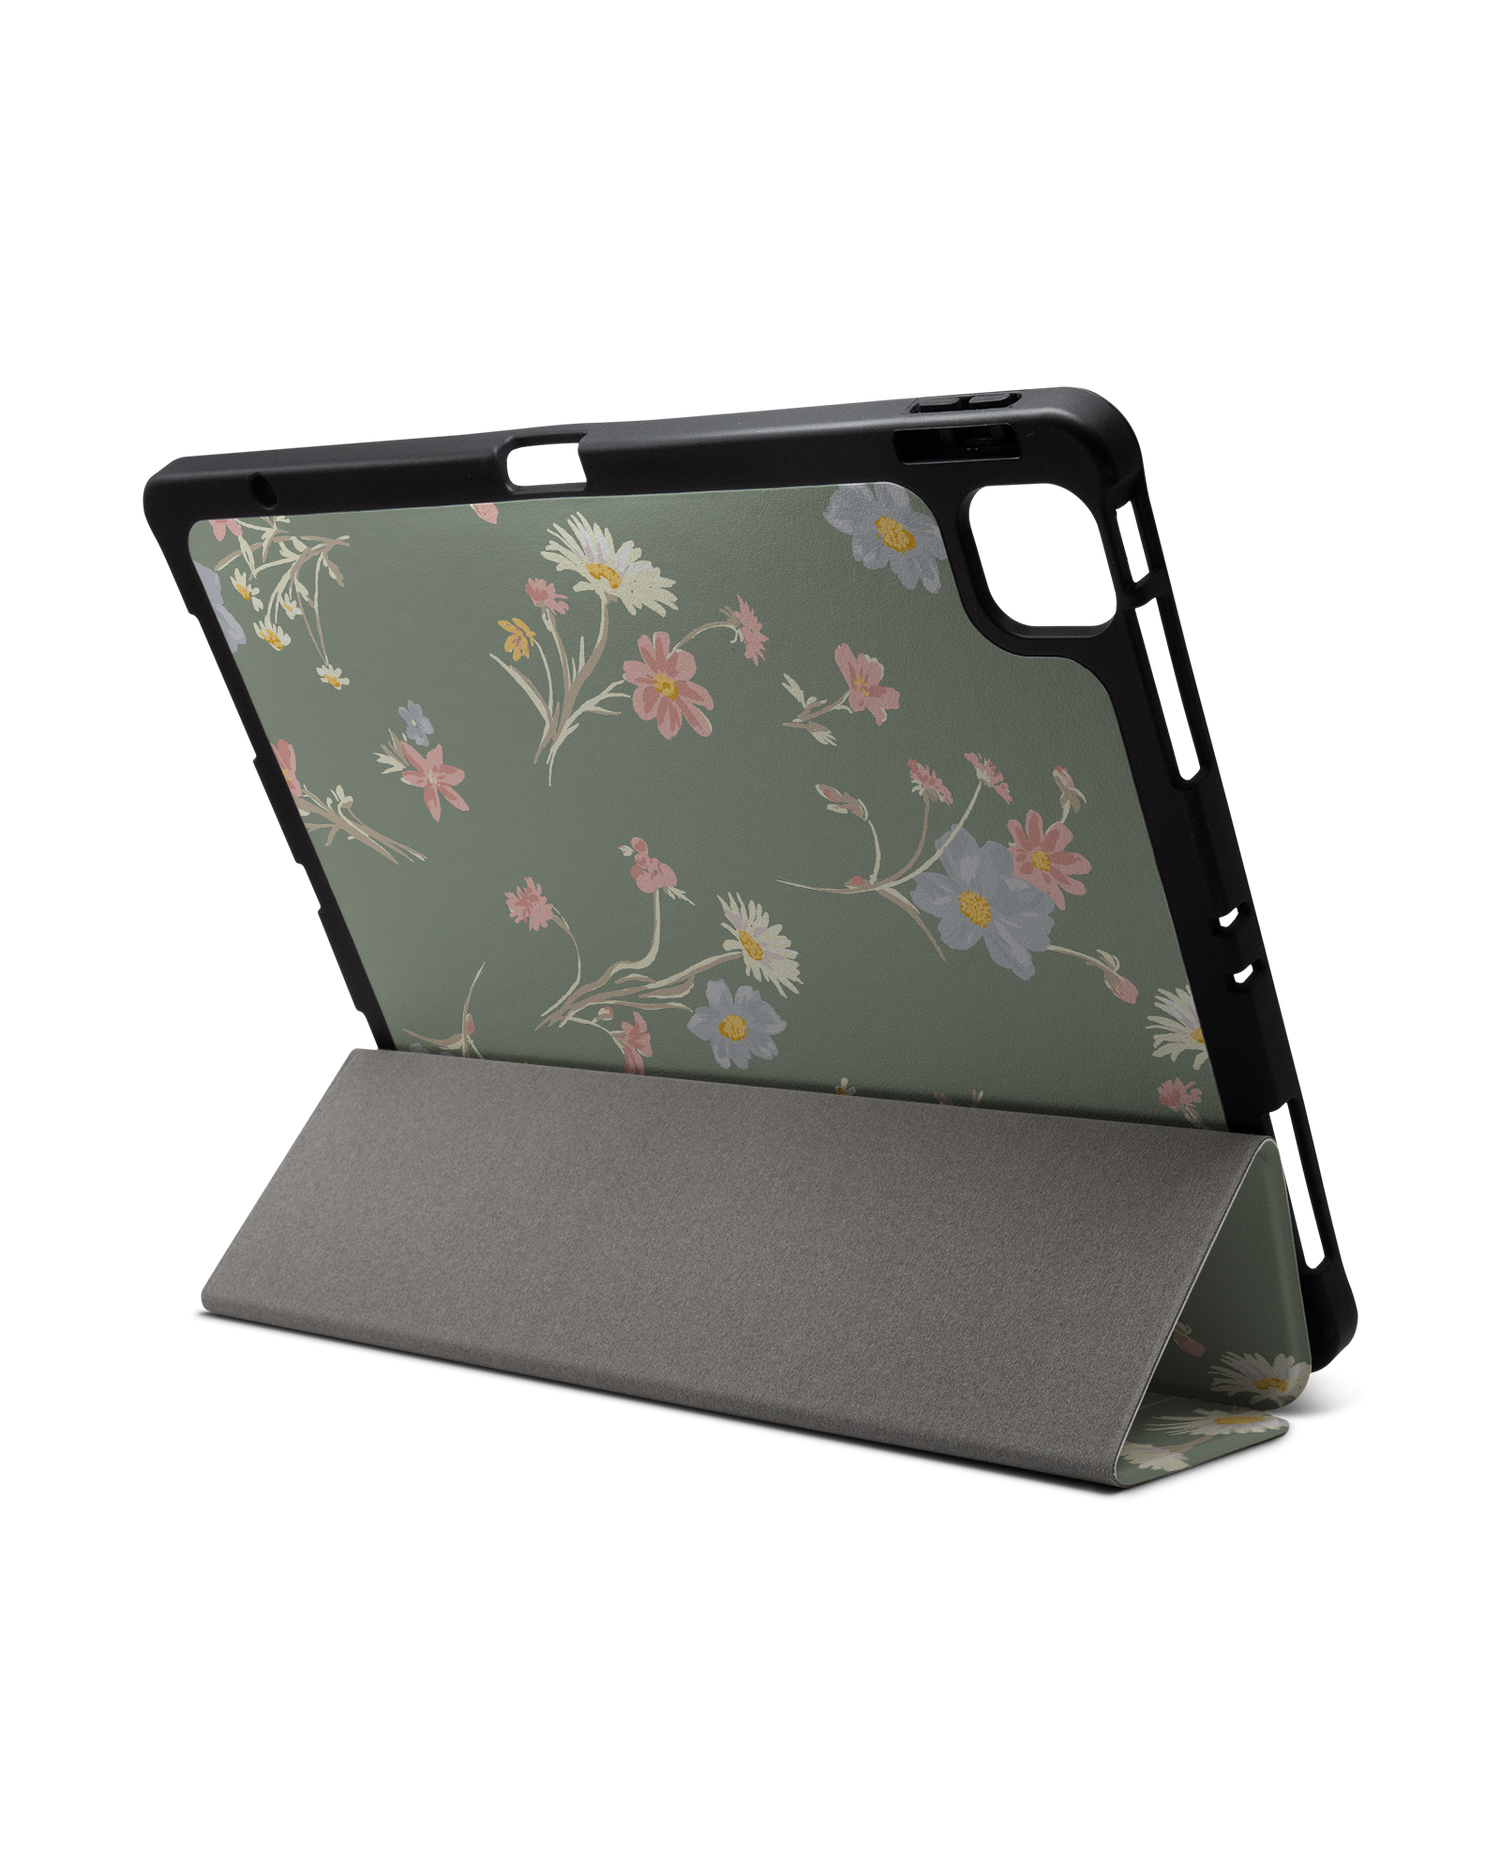 Wild Flower Sprigs iPad Case with Pencil Holder for Apple iPad Pro 6 12.9